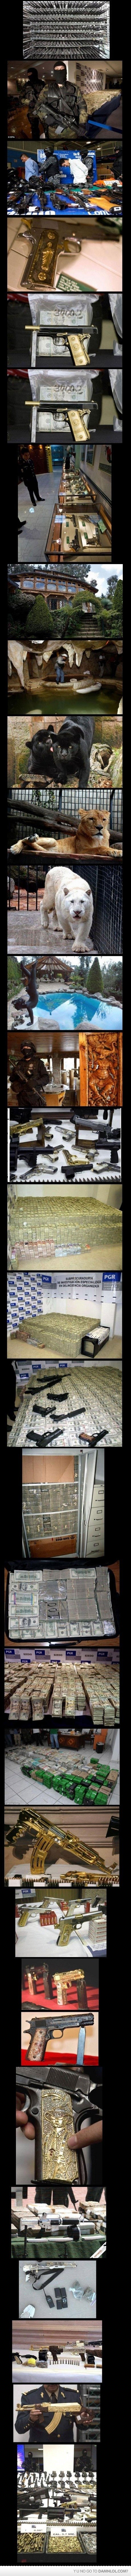 How rich is a drug lord?. Very..